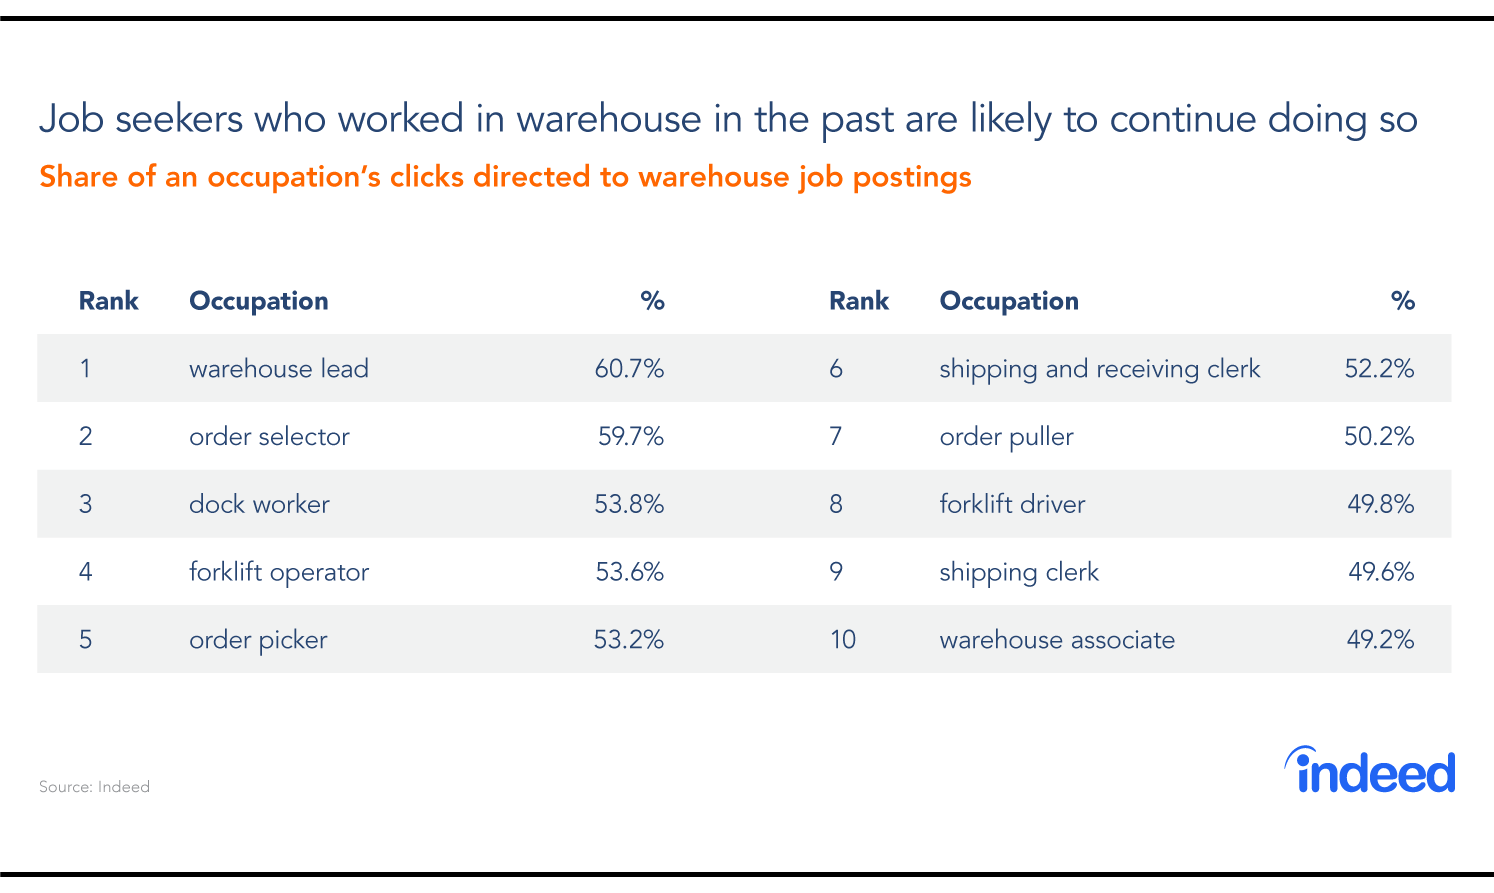 Job seekers who worked in warehouse in the past are likely to continue doing so